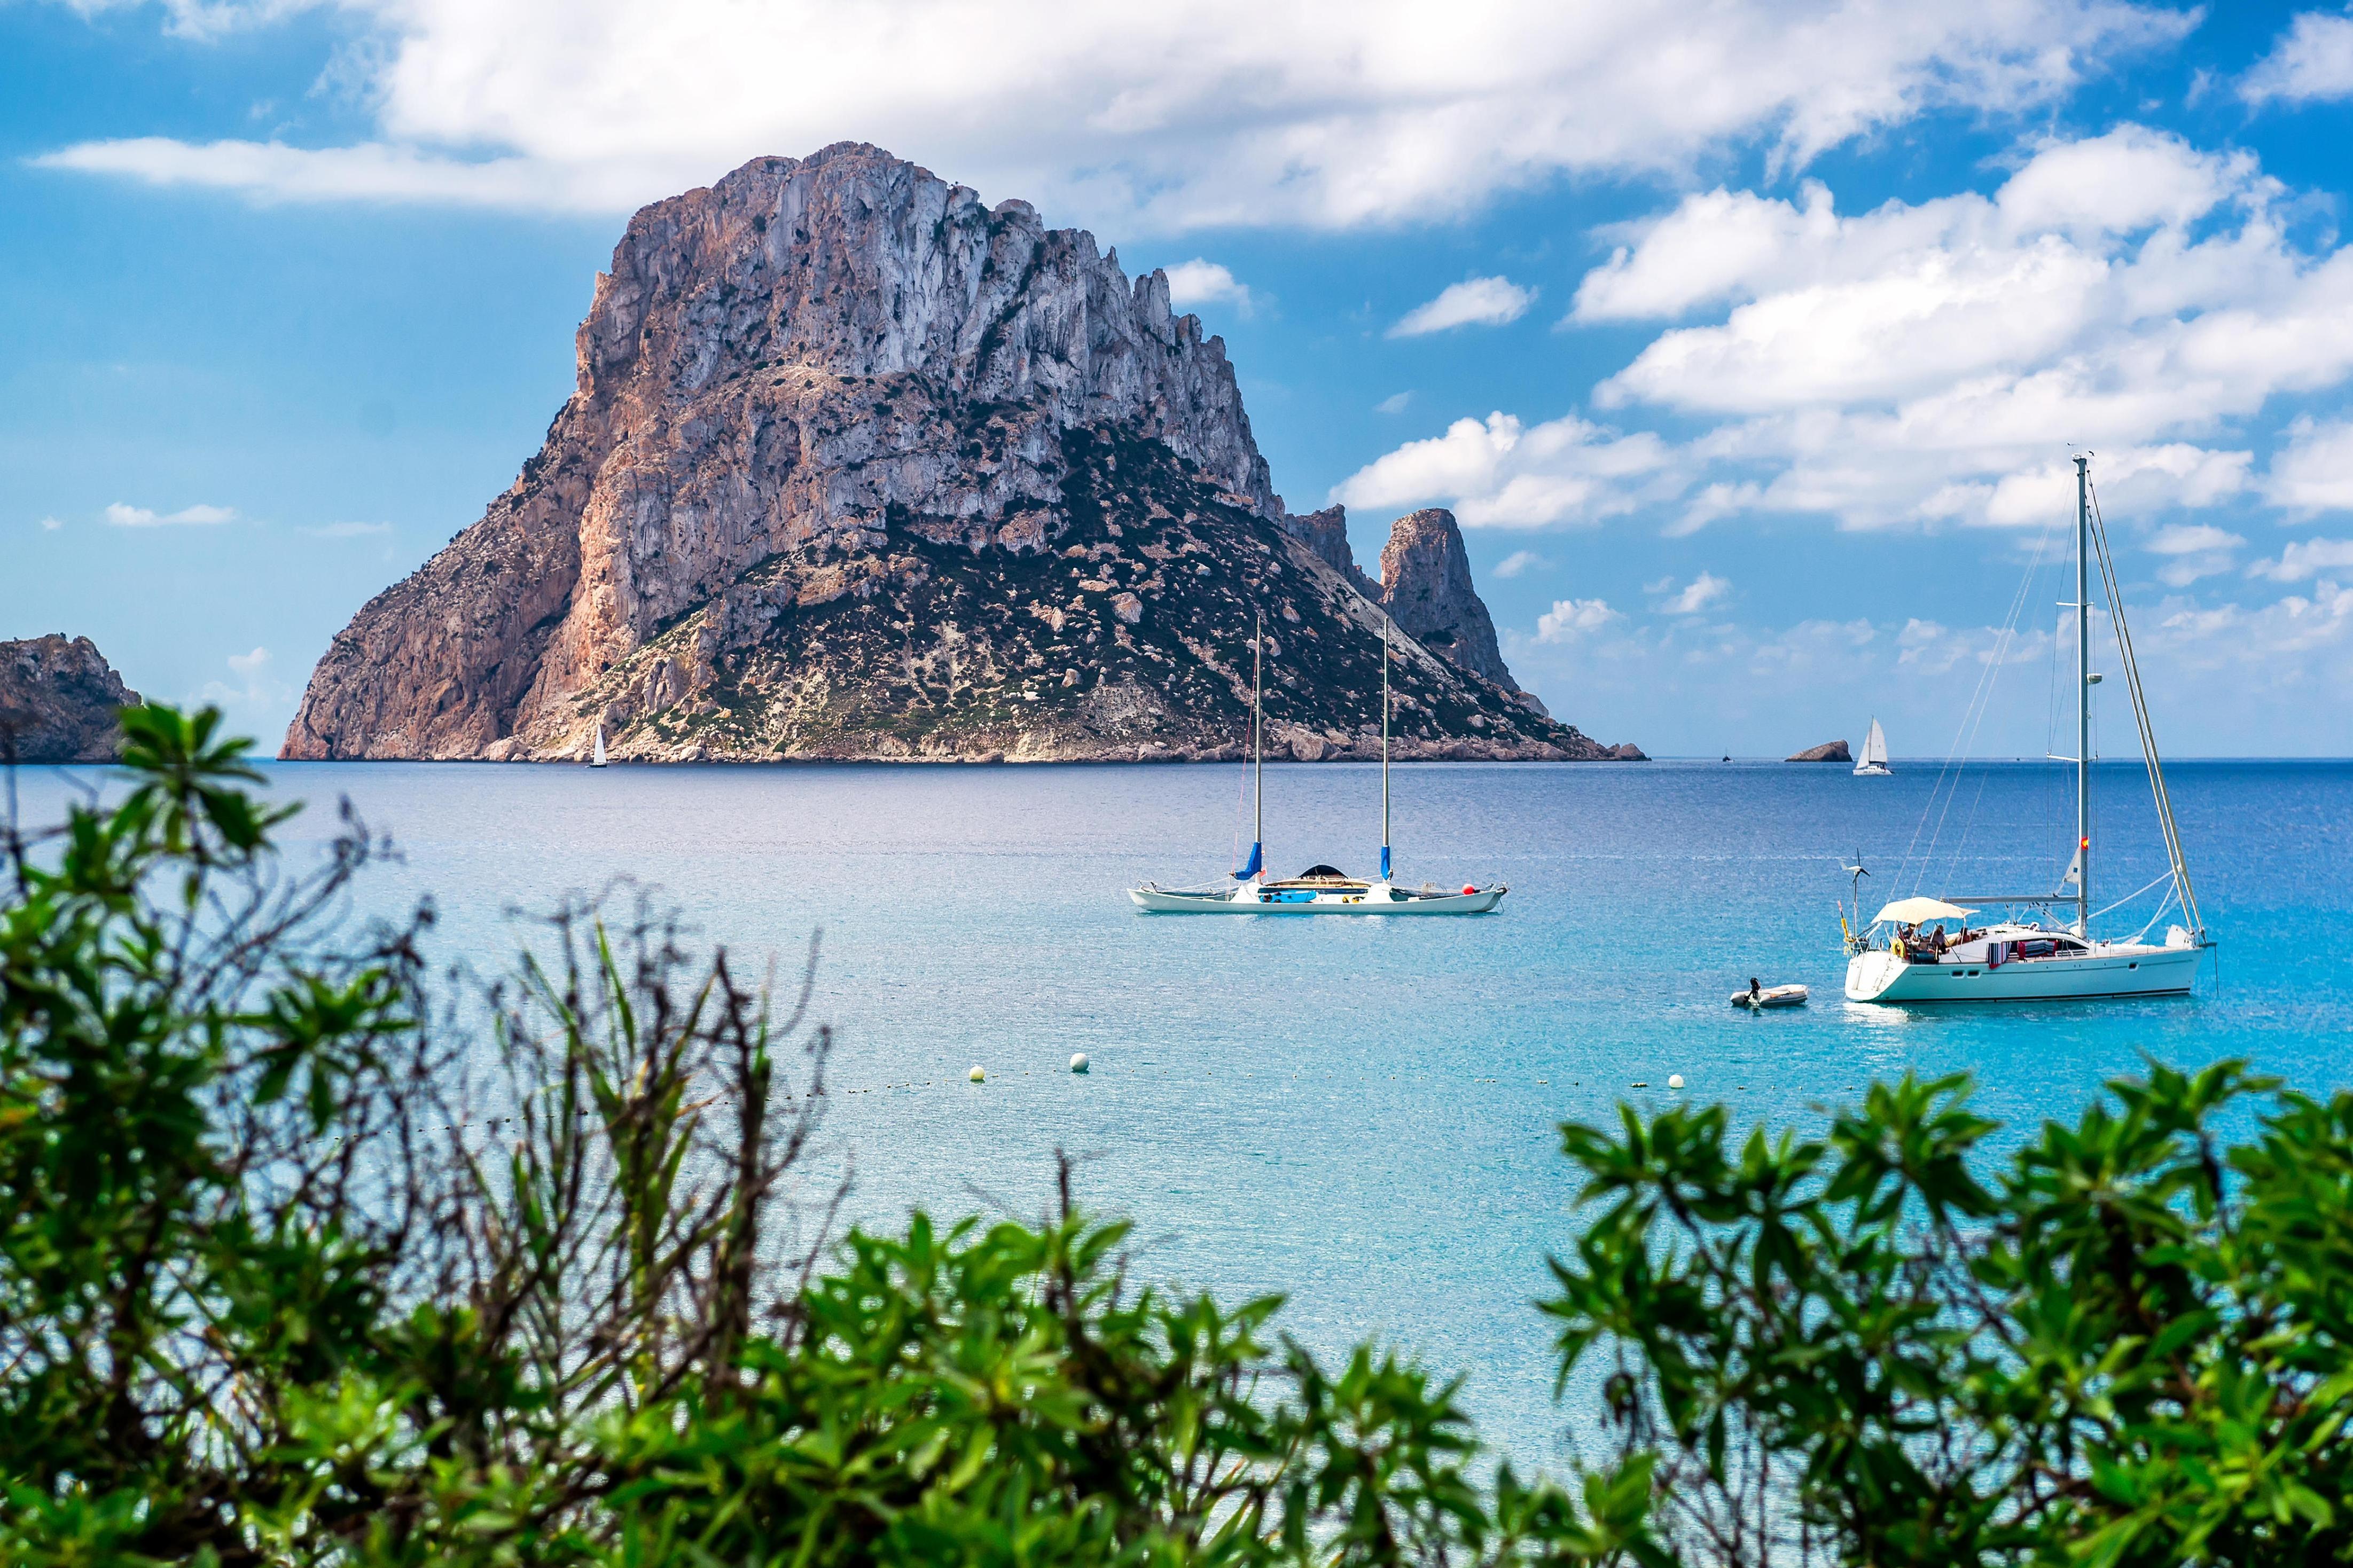 View of Es Vedra island from Ibiza